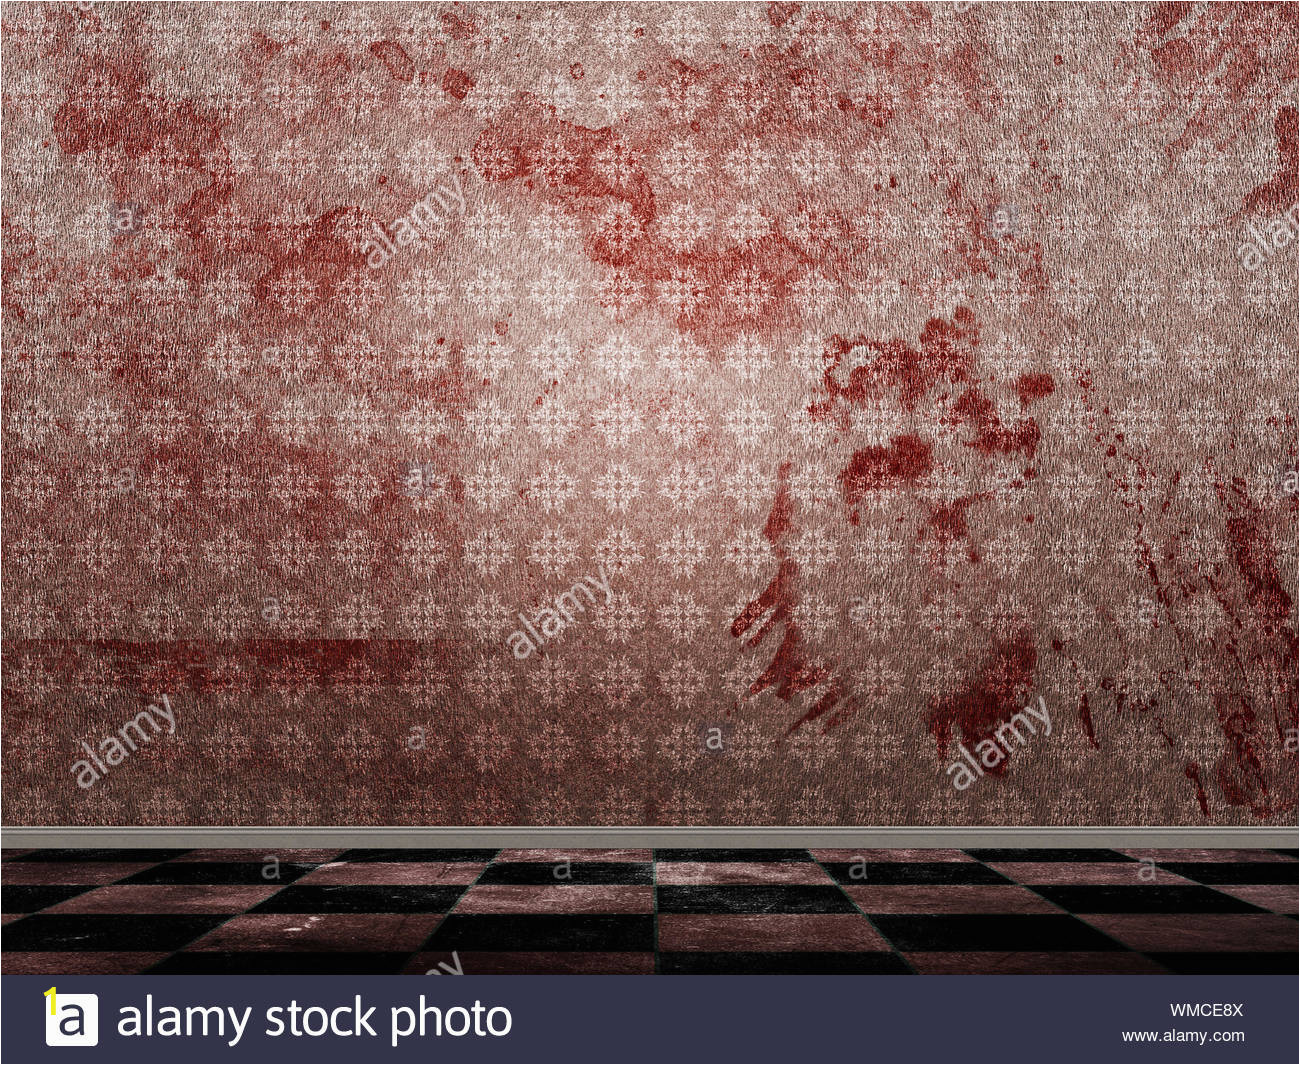 Bloody Bay Wall Mural Bloody Wall Stock S & Bloody Wall Stock Alamy